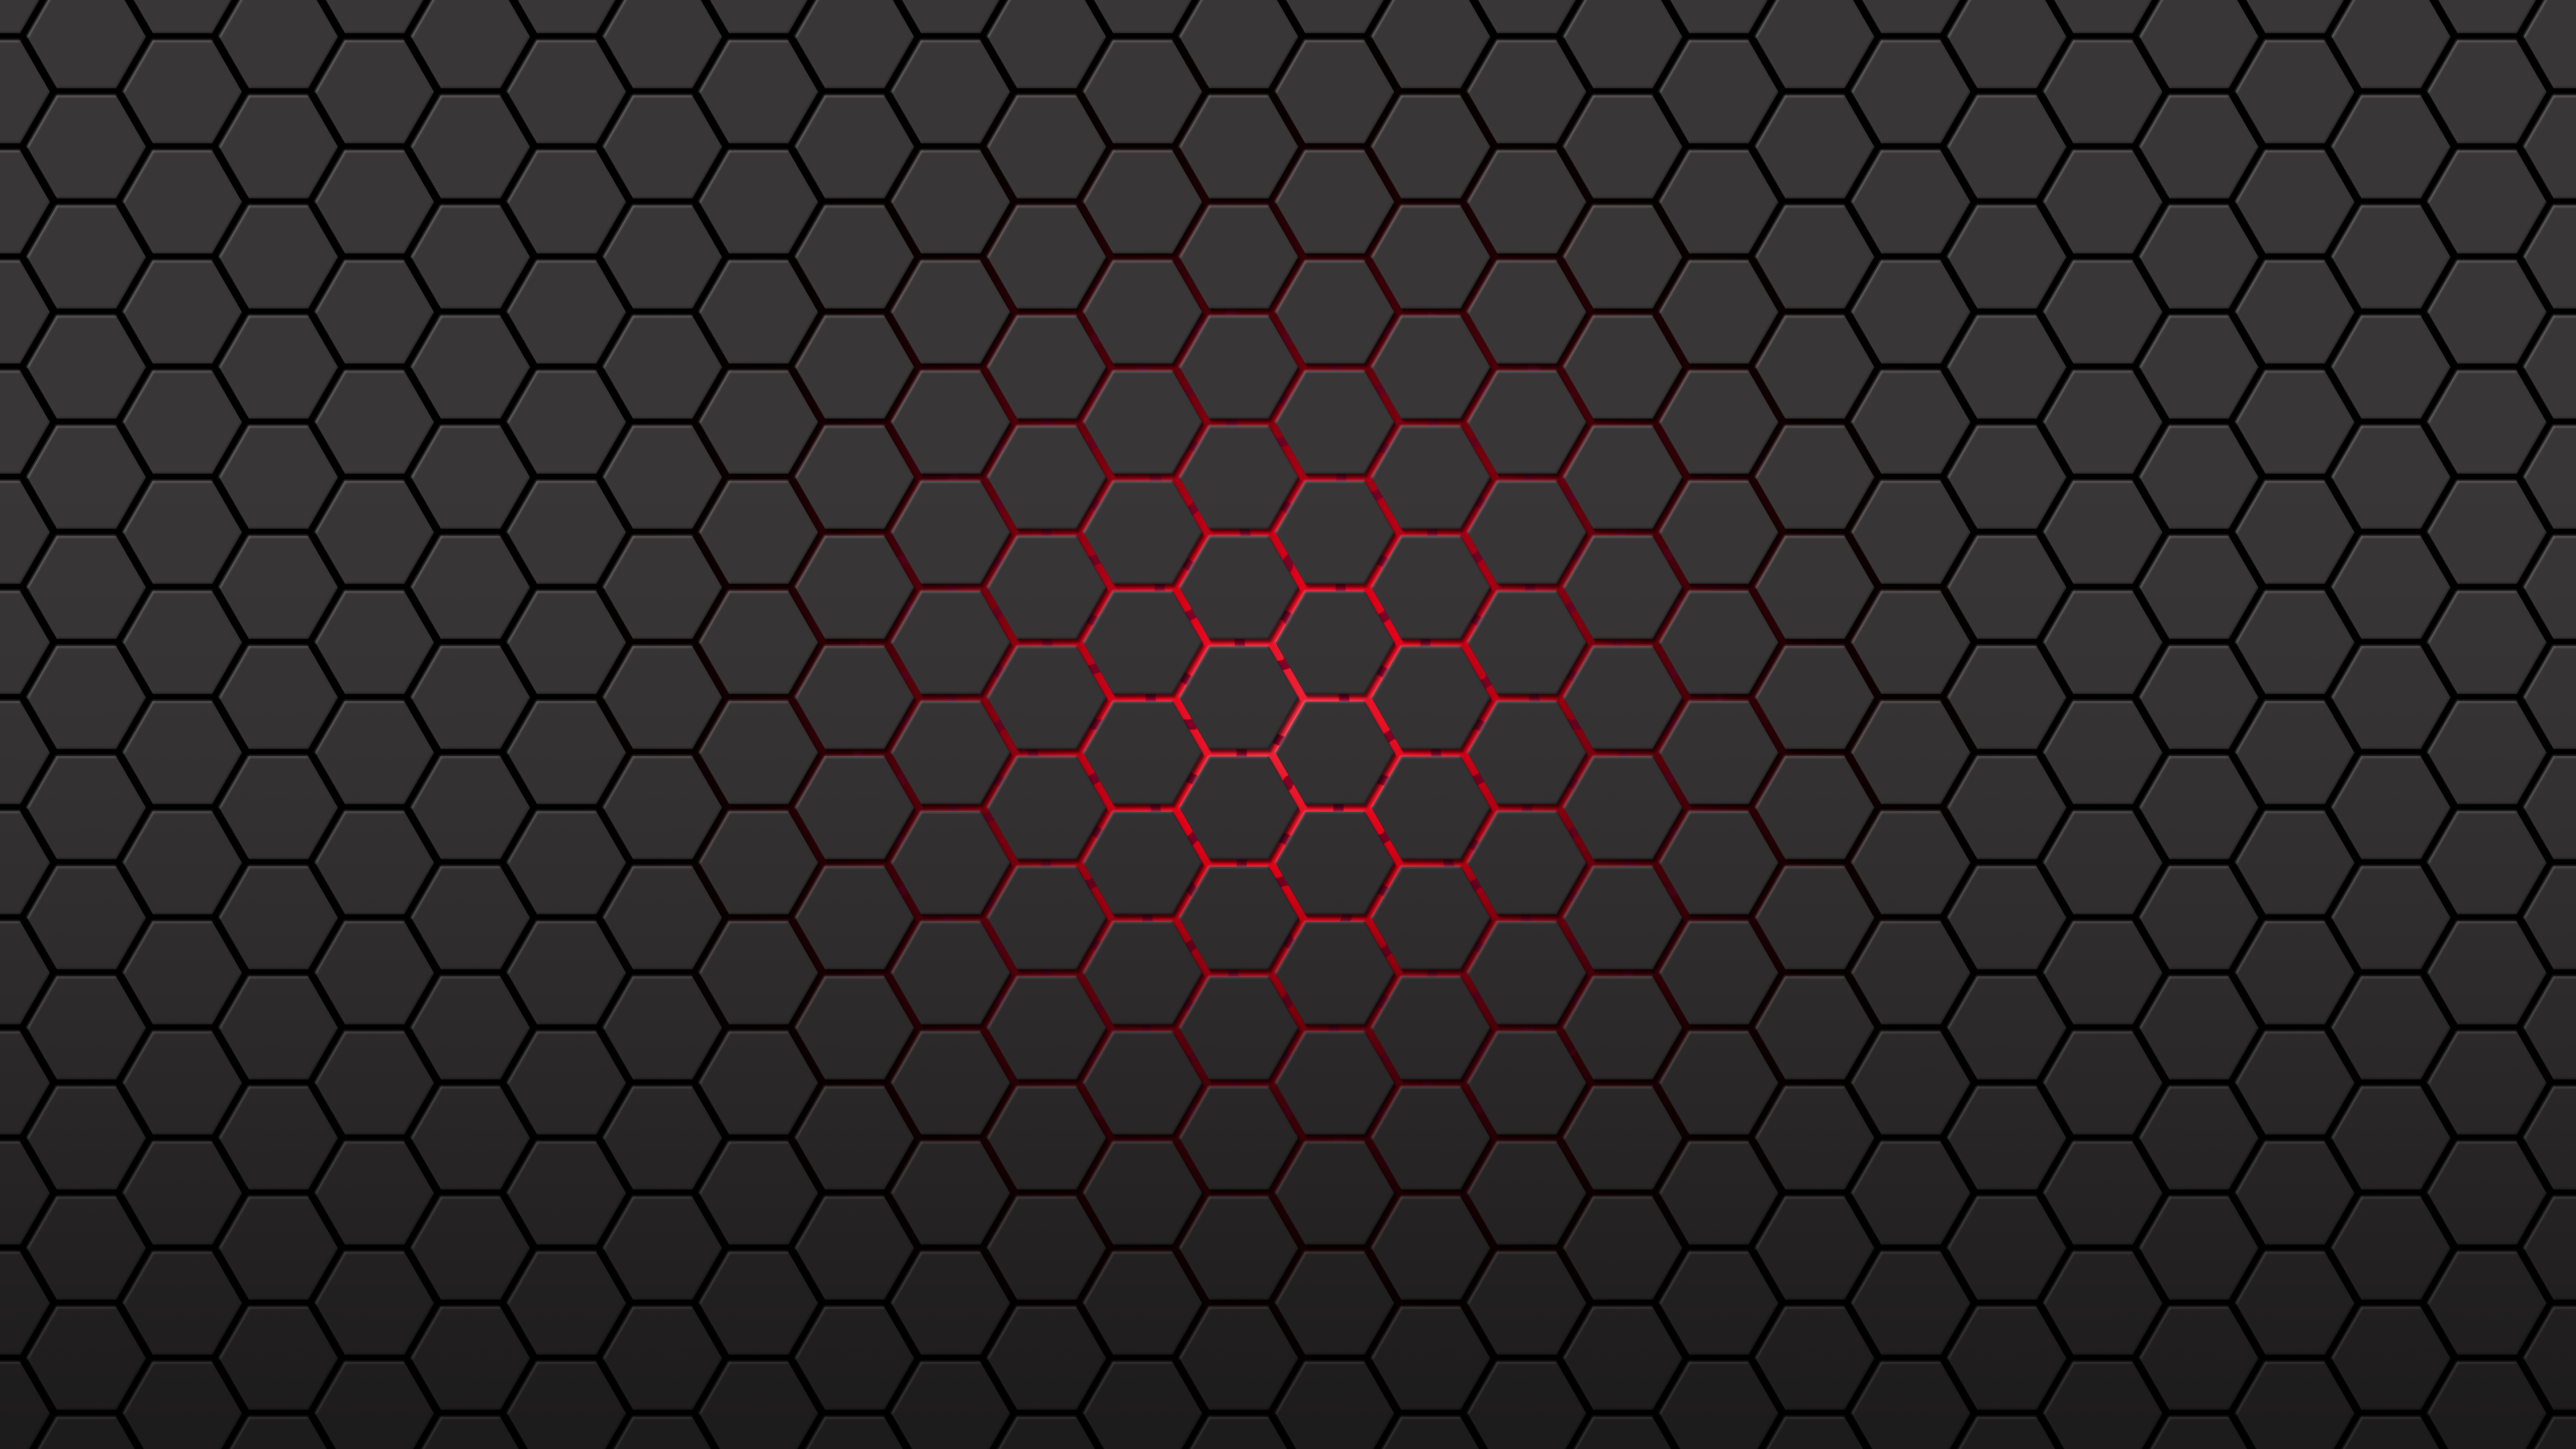 Hexagon Shine 4k Wallpaper Collection V2 10 Colors By Rv770 On ...